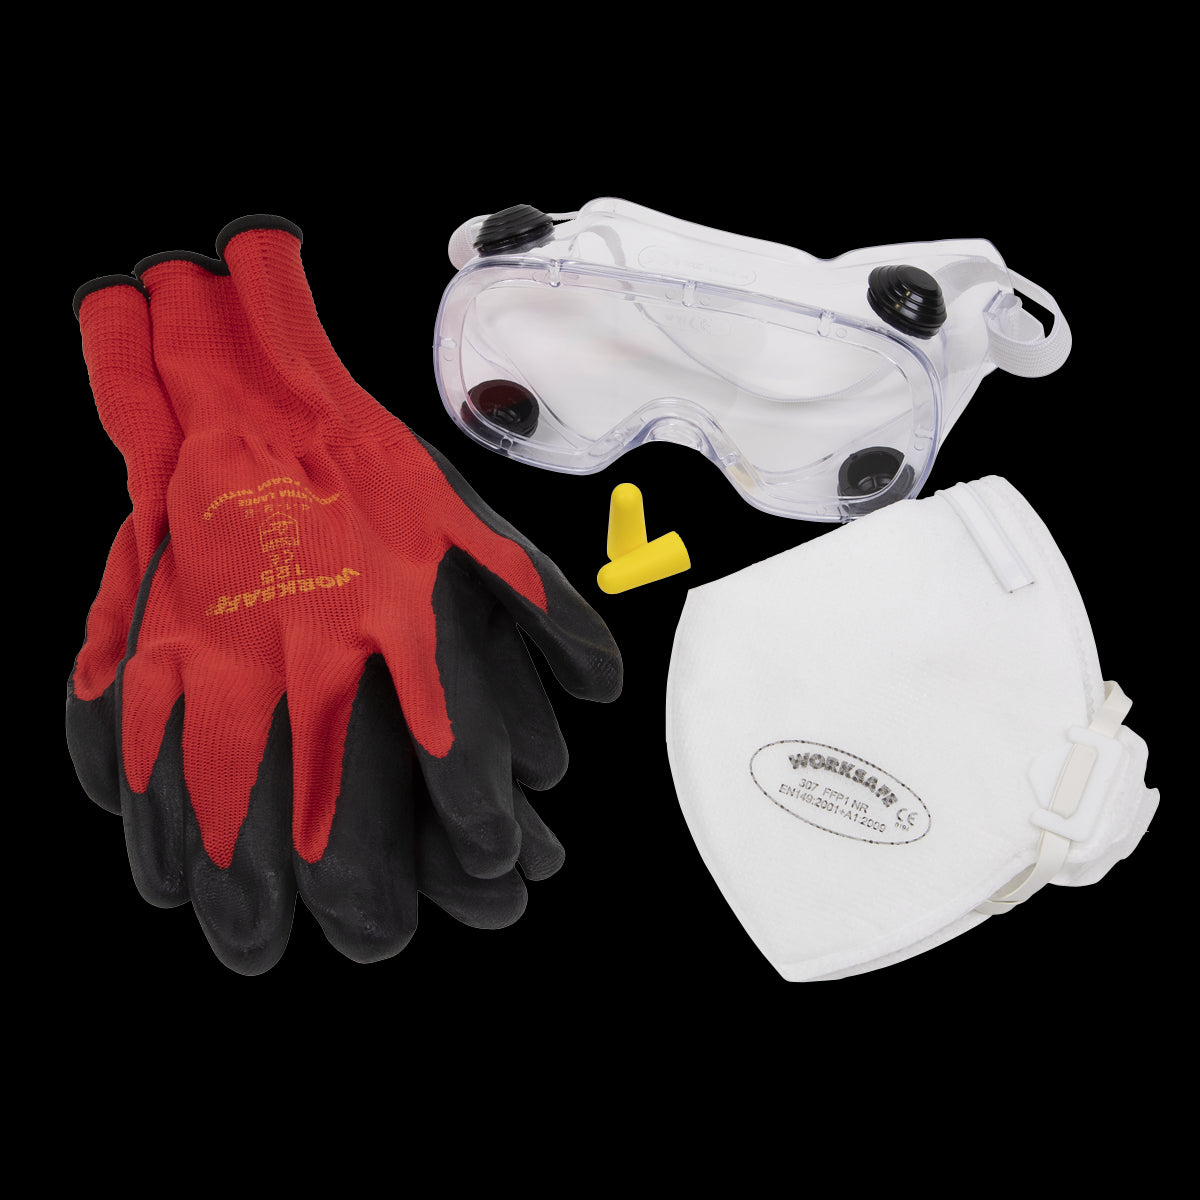 Worksafe by Sealey Flexi Grip Gloves, FFP1 Mask, Goggles & Ear Plugs